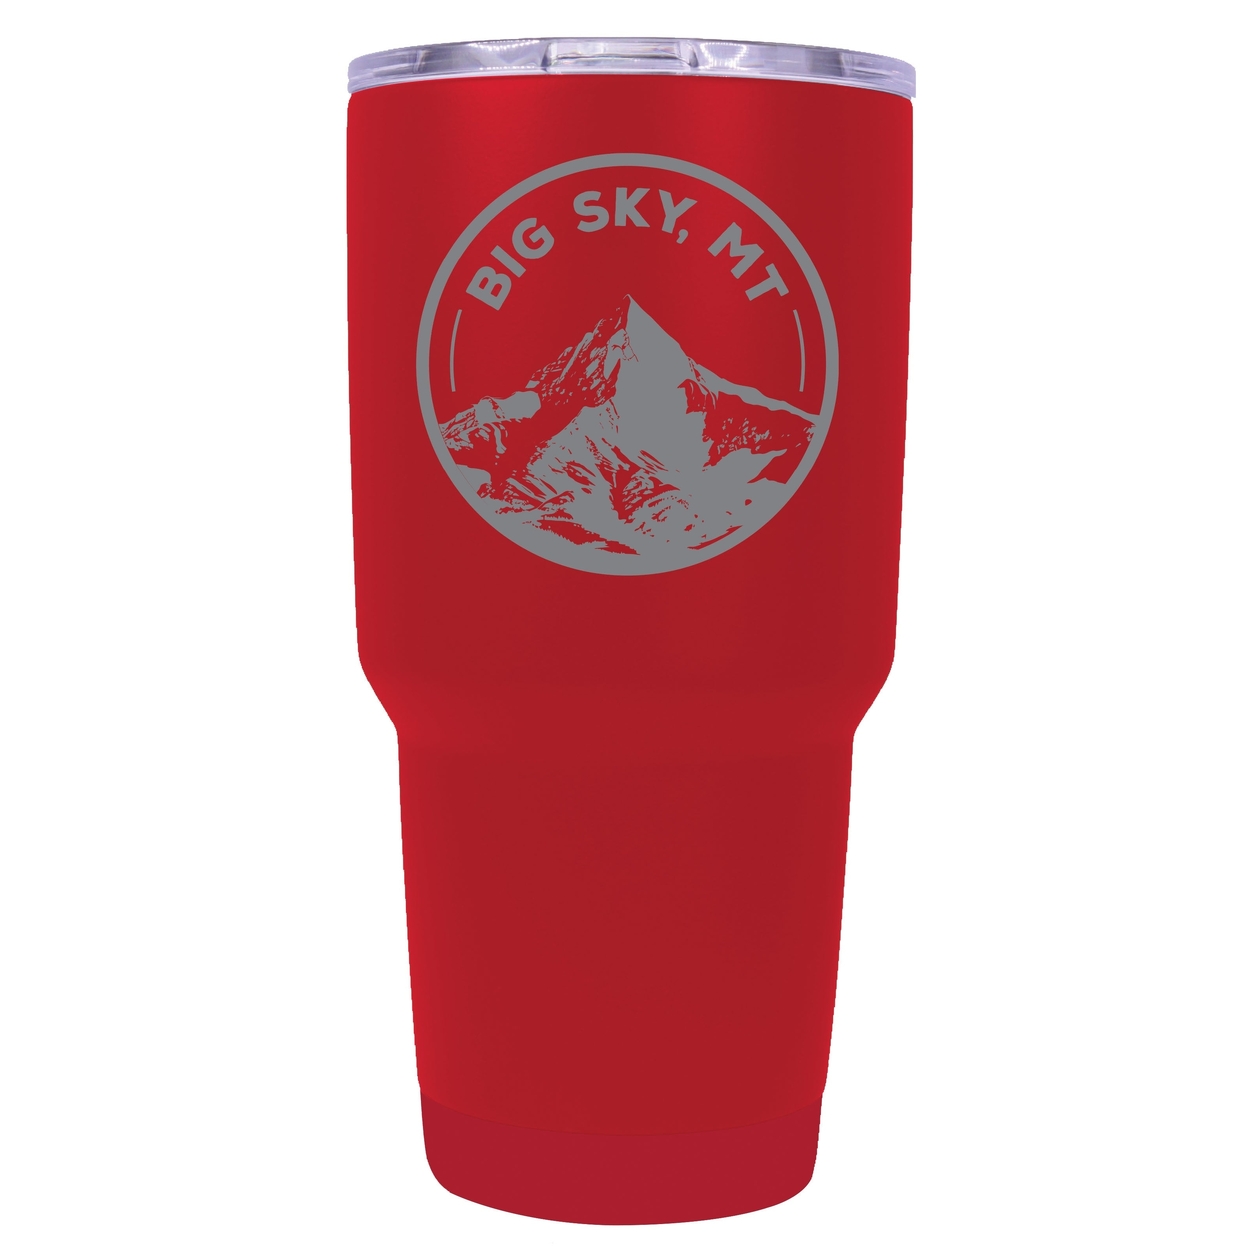 Big Sky Montana Souvenir 24 Oz Engraved Insulated Stainless Steel Tumbler - Navy,,4-Pack